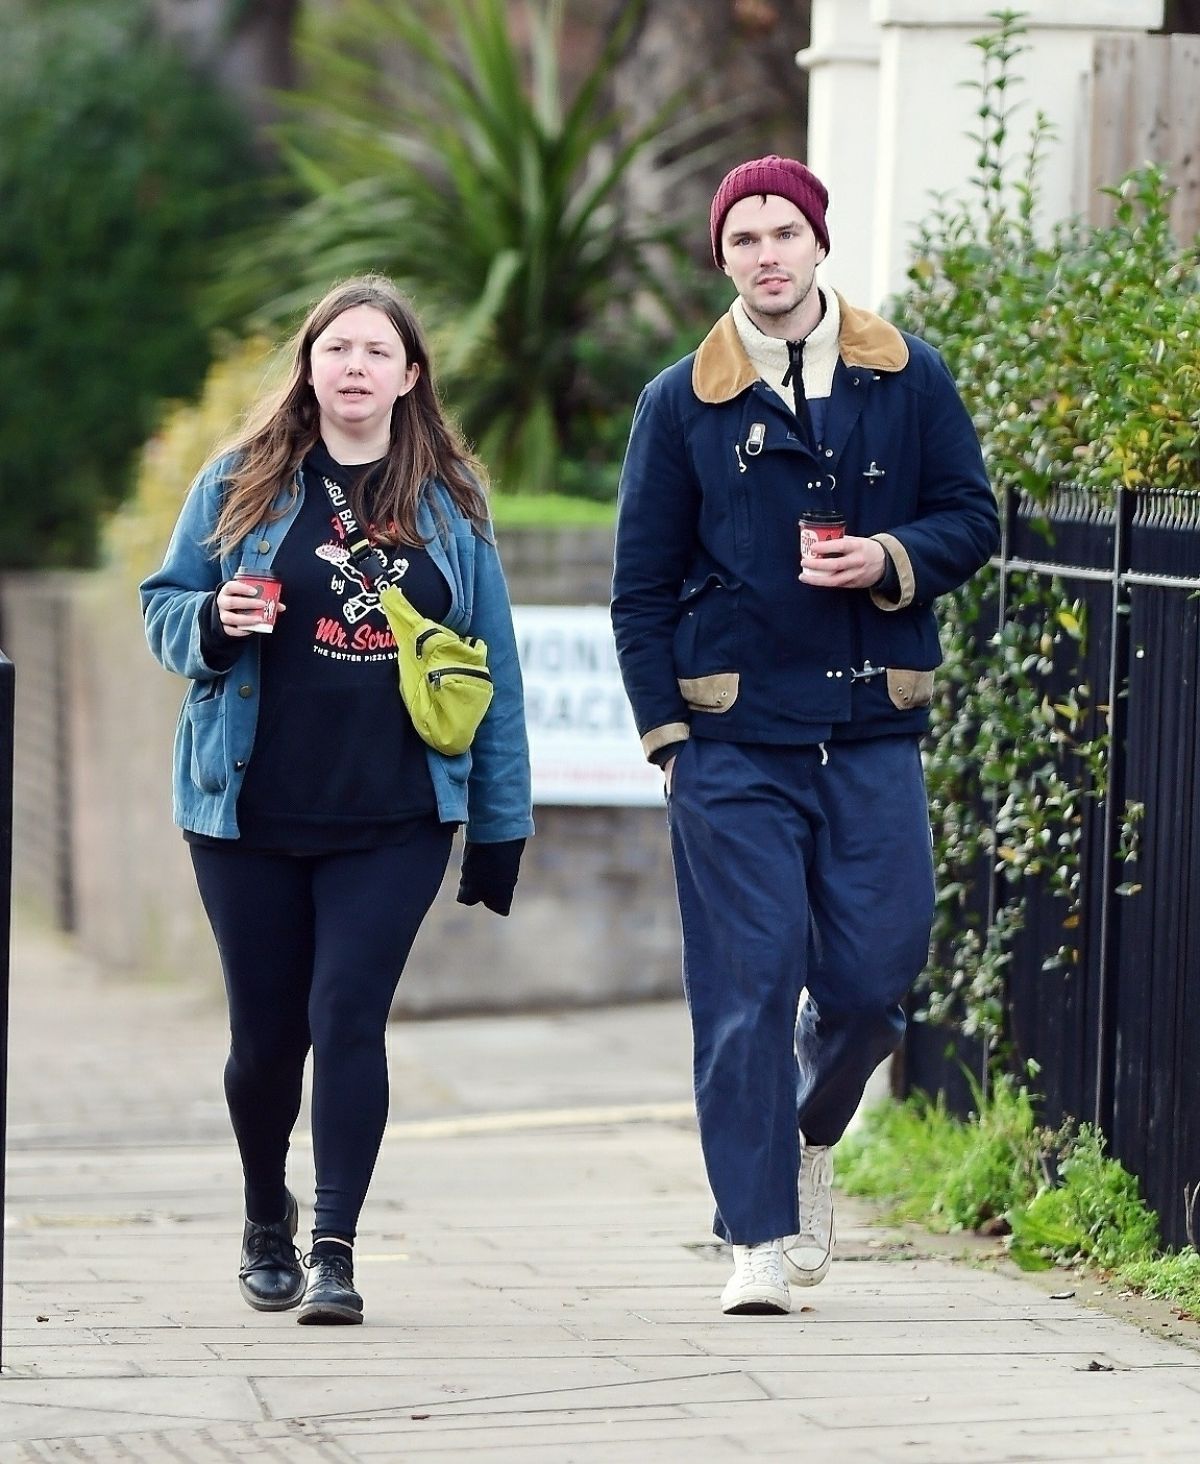 hannah-murray-and-nicholas-hoult-out-in-primrose-hill-01-02-2021-5.jpg